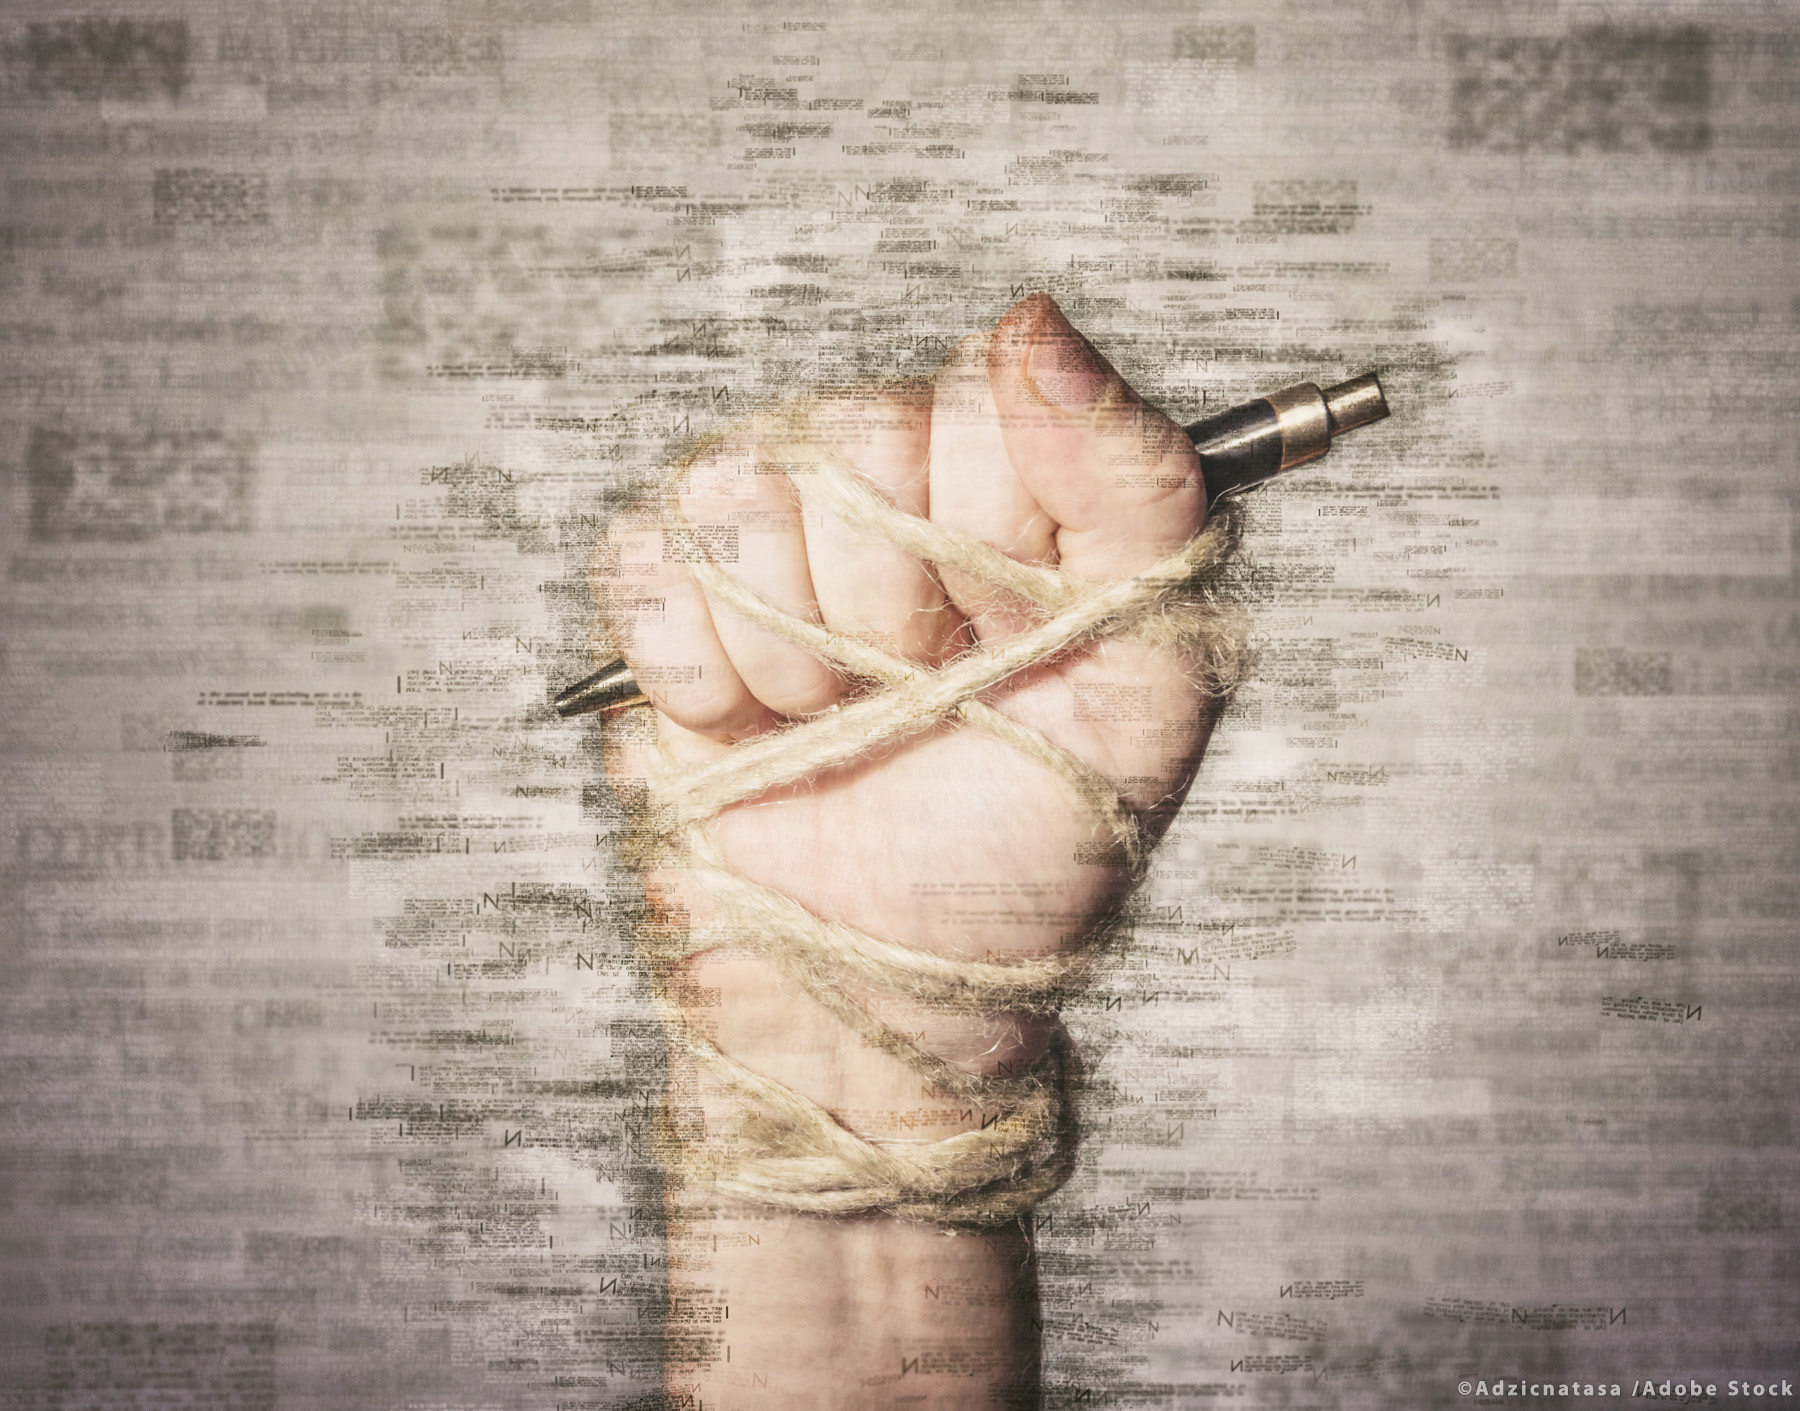 Hand with pen tied with rope, depicting the idea of freedom of the press or freedom of expression